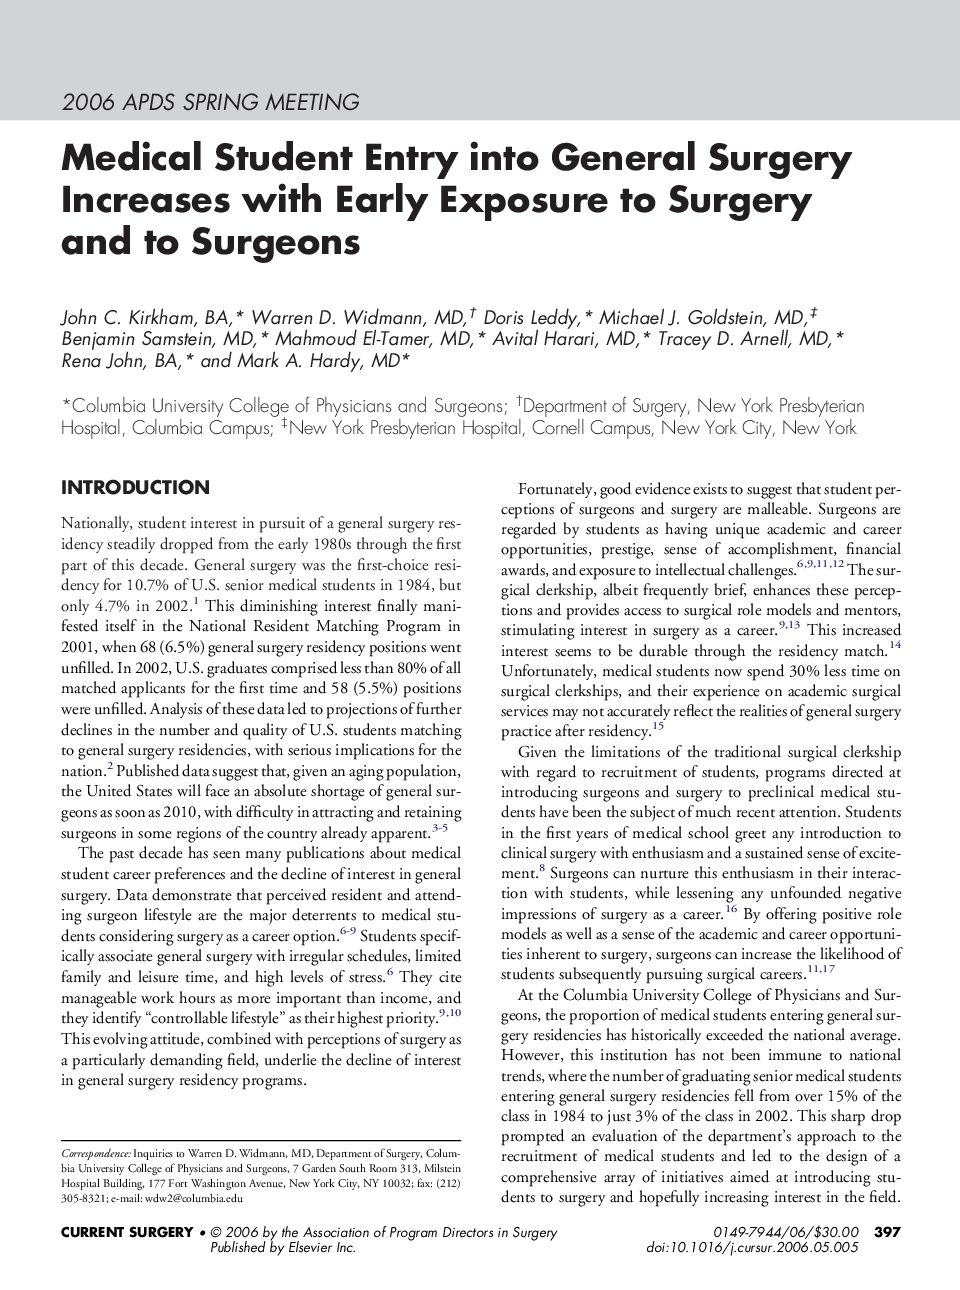 Medical Student Entry into General Surgery Increases with Early Exposure to Surgery and to Surgeons